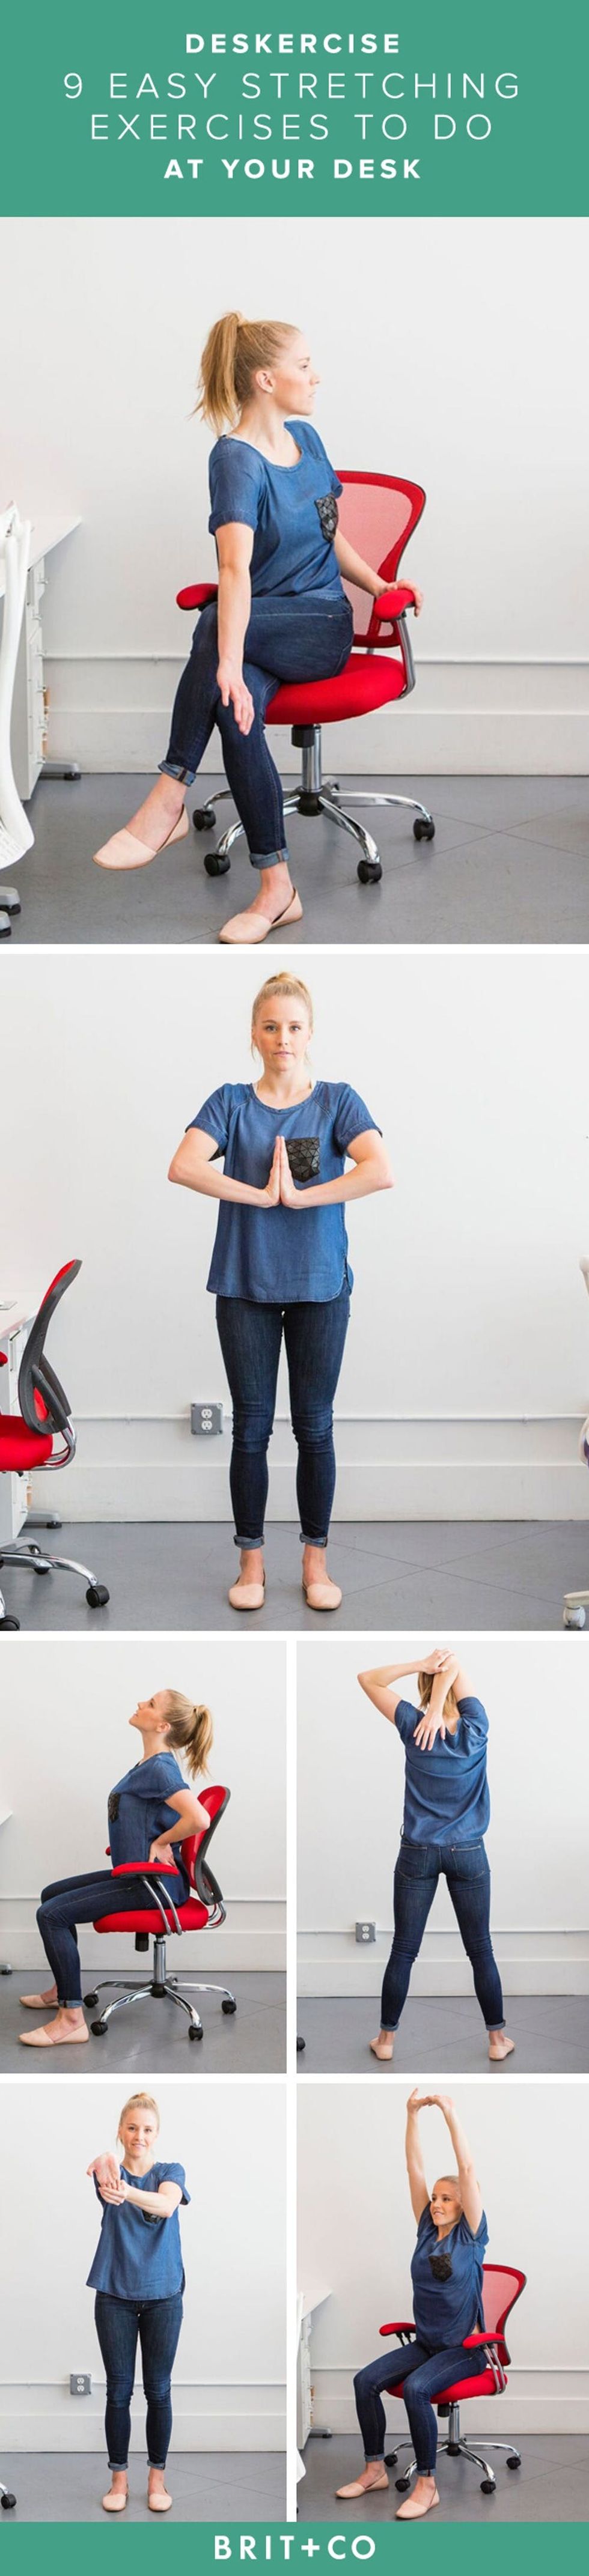 Deskercise 9 Easy Stretches You Can Do At Your Desk Brit Co